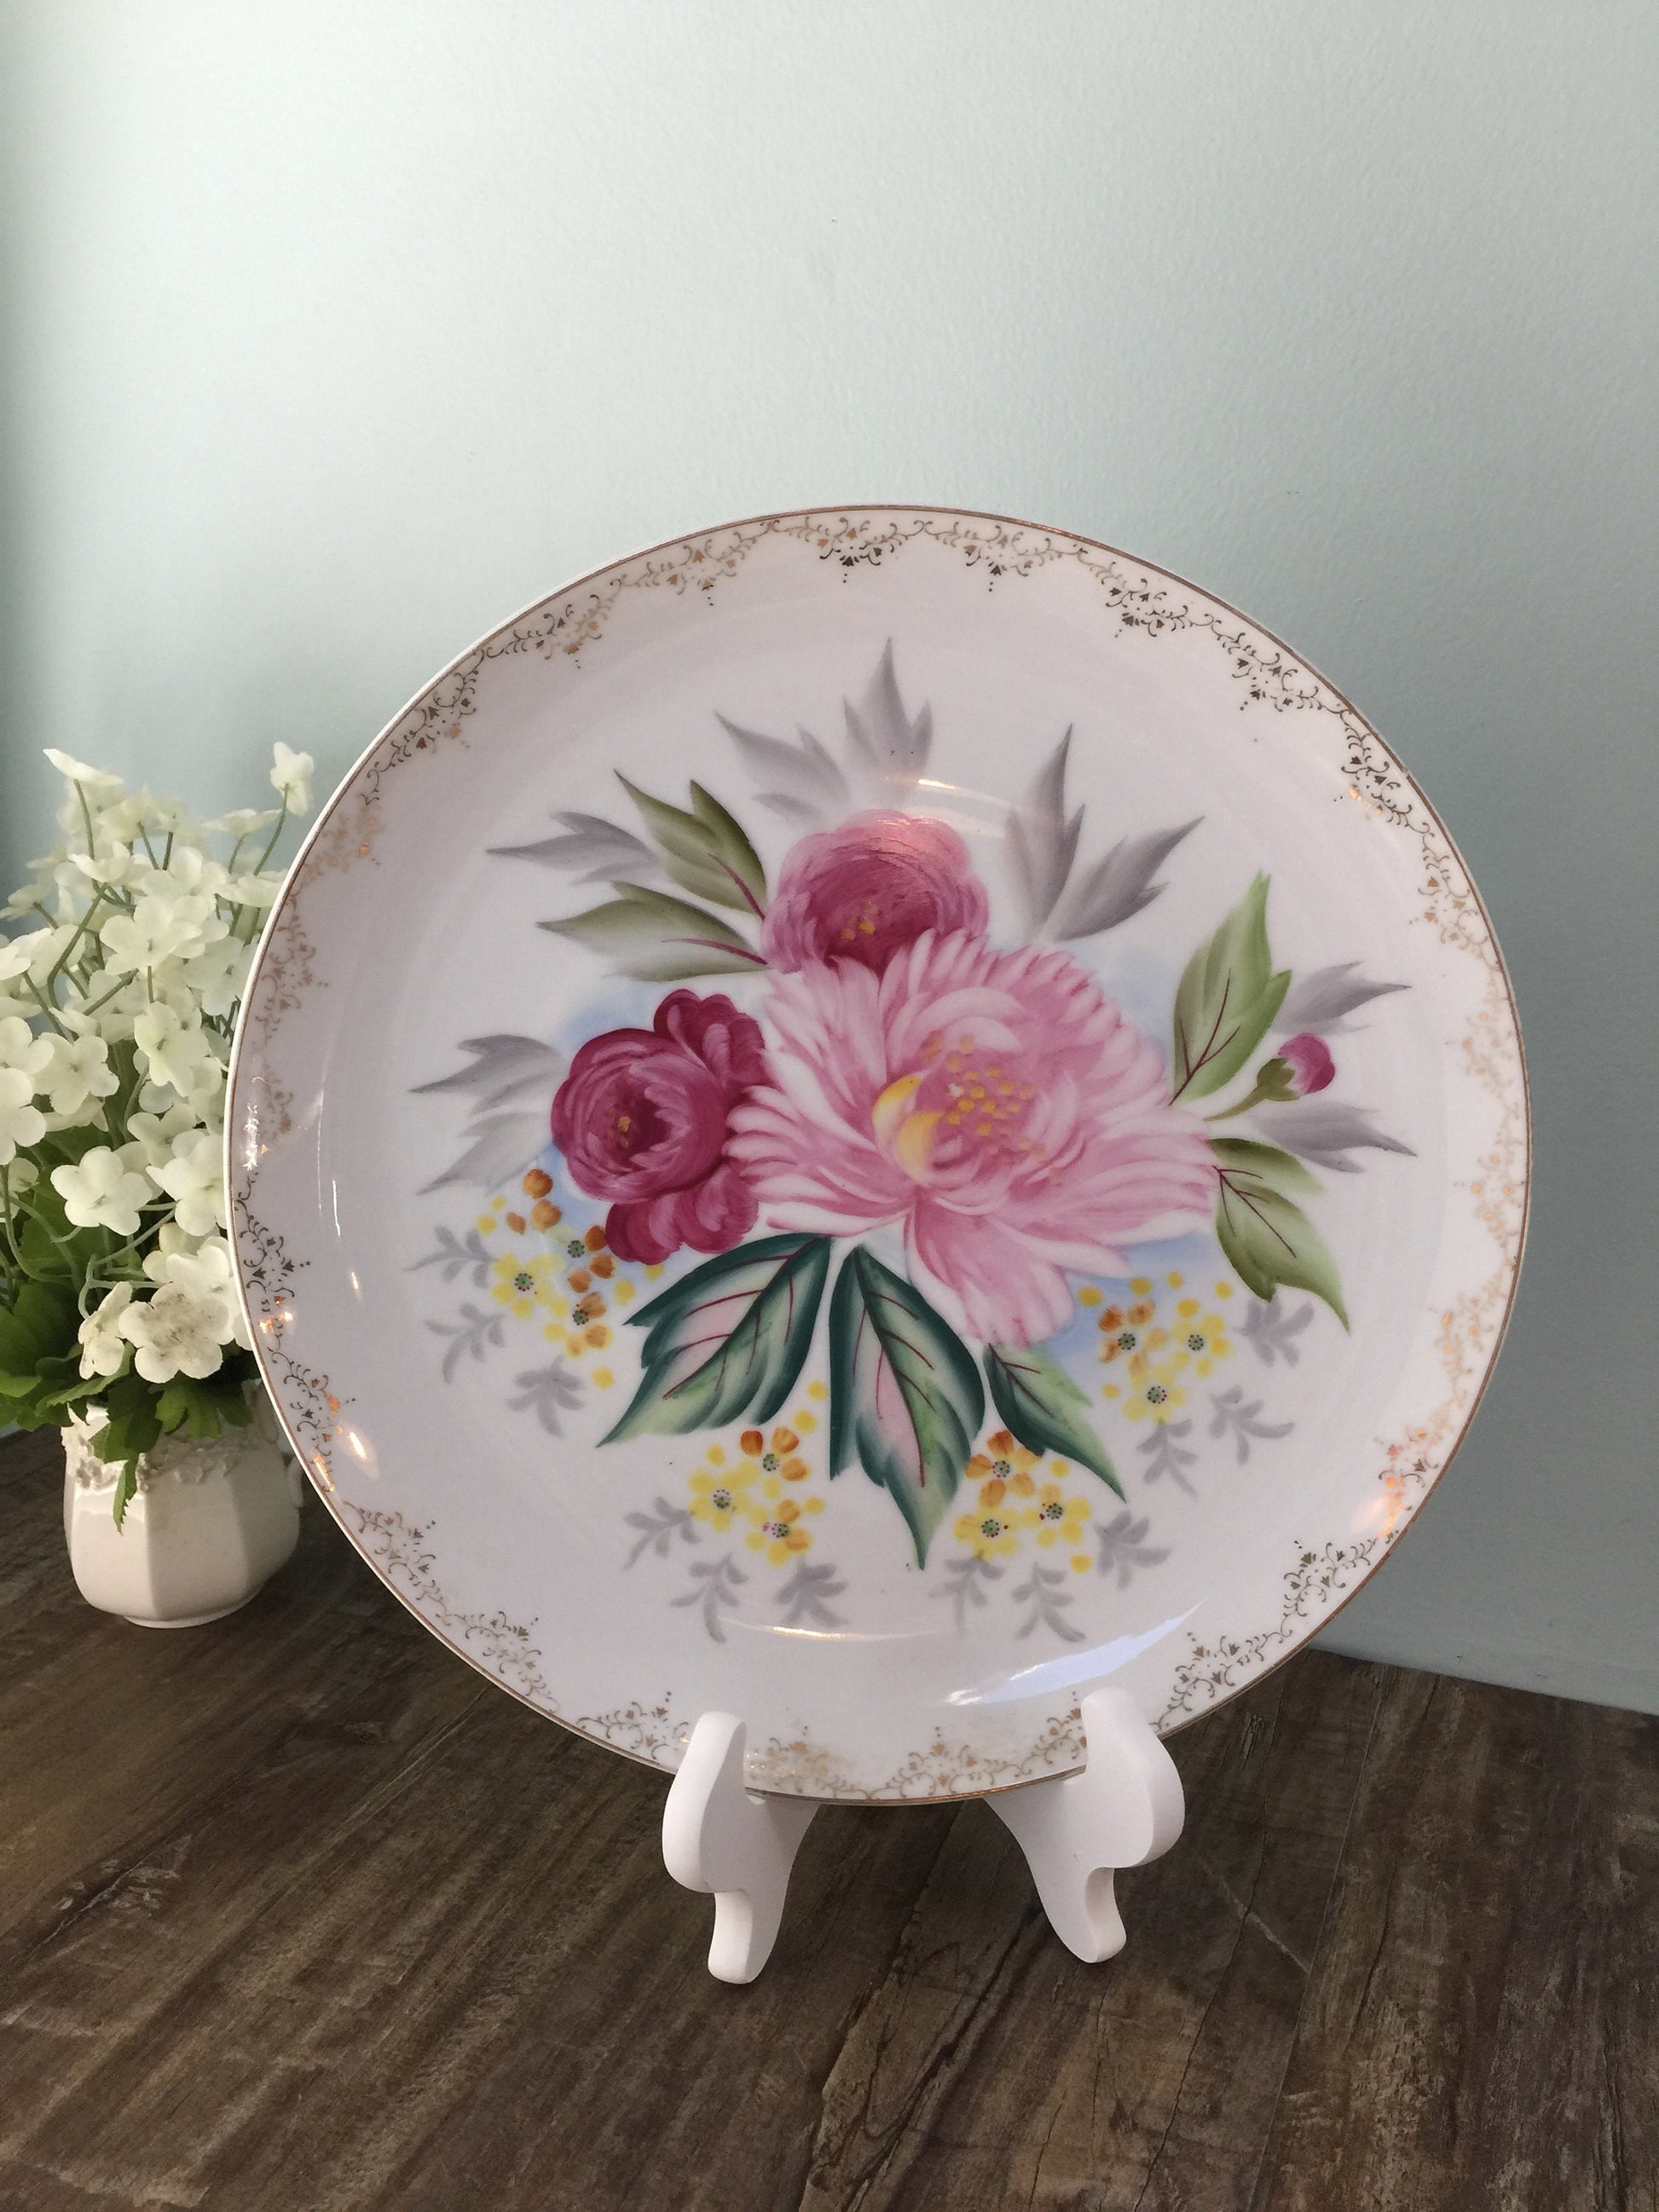 VIntage Floral Porcelain China Plate - High Quality Hand Painted Floral Pattern - Duckwells